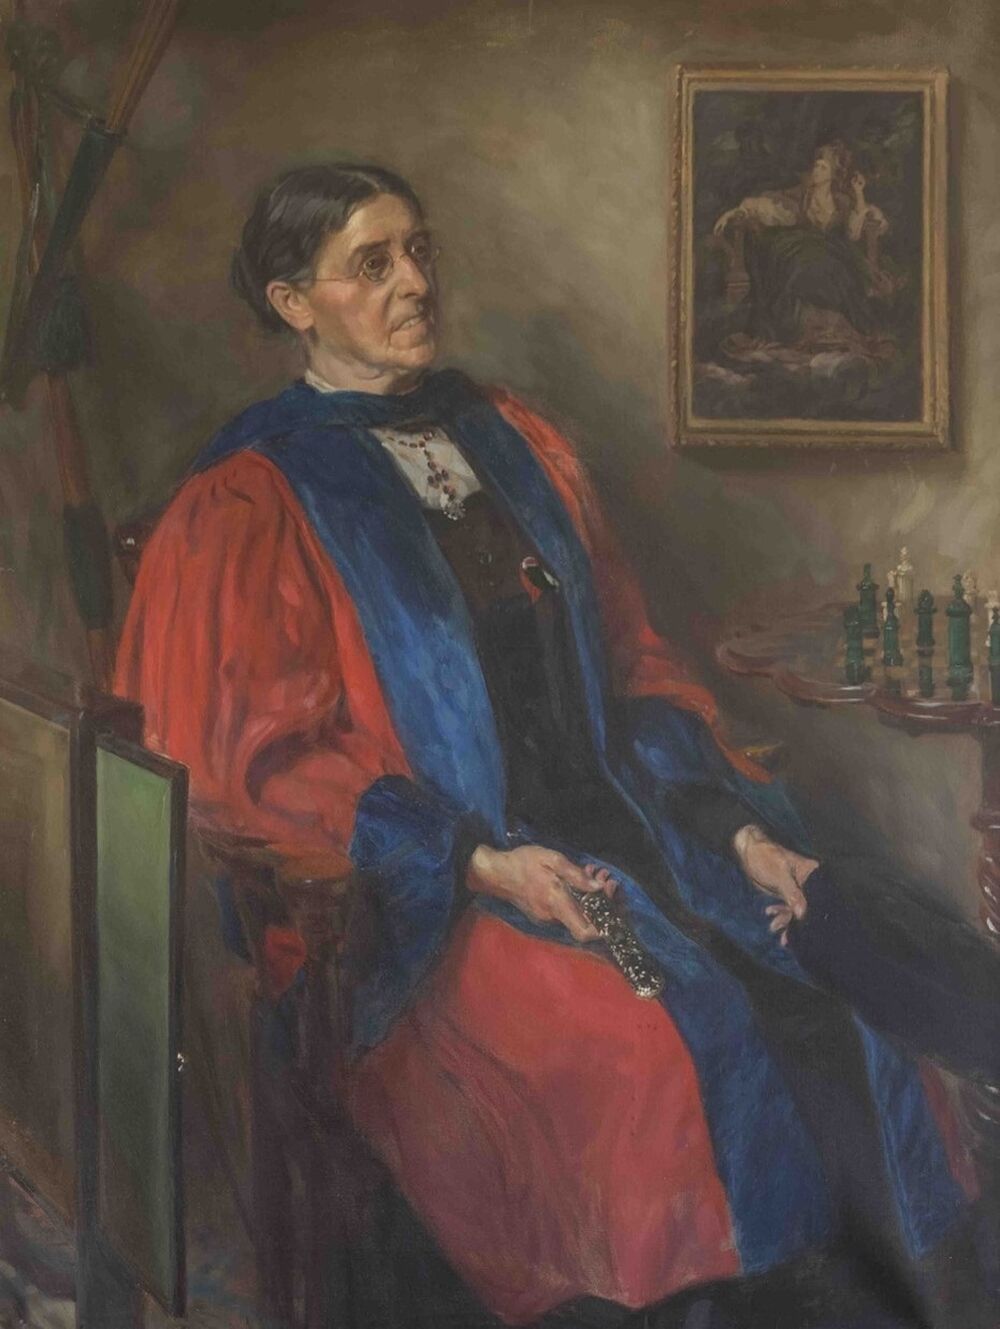 A painted portrait of an older woman in glasses with her greying hair pulled back into a bun, sitting in a chair in front of a small table with a game of chess set up on it. She's wearing a red scholar's gown with blue fabric lining the cuffs and seams.